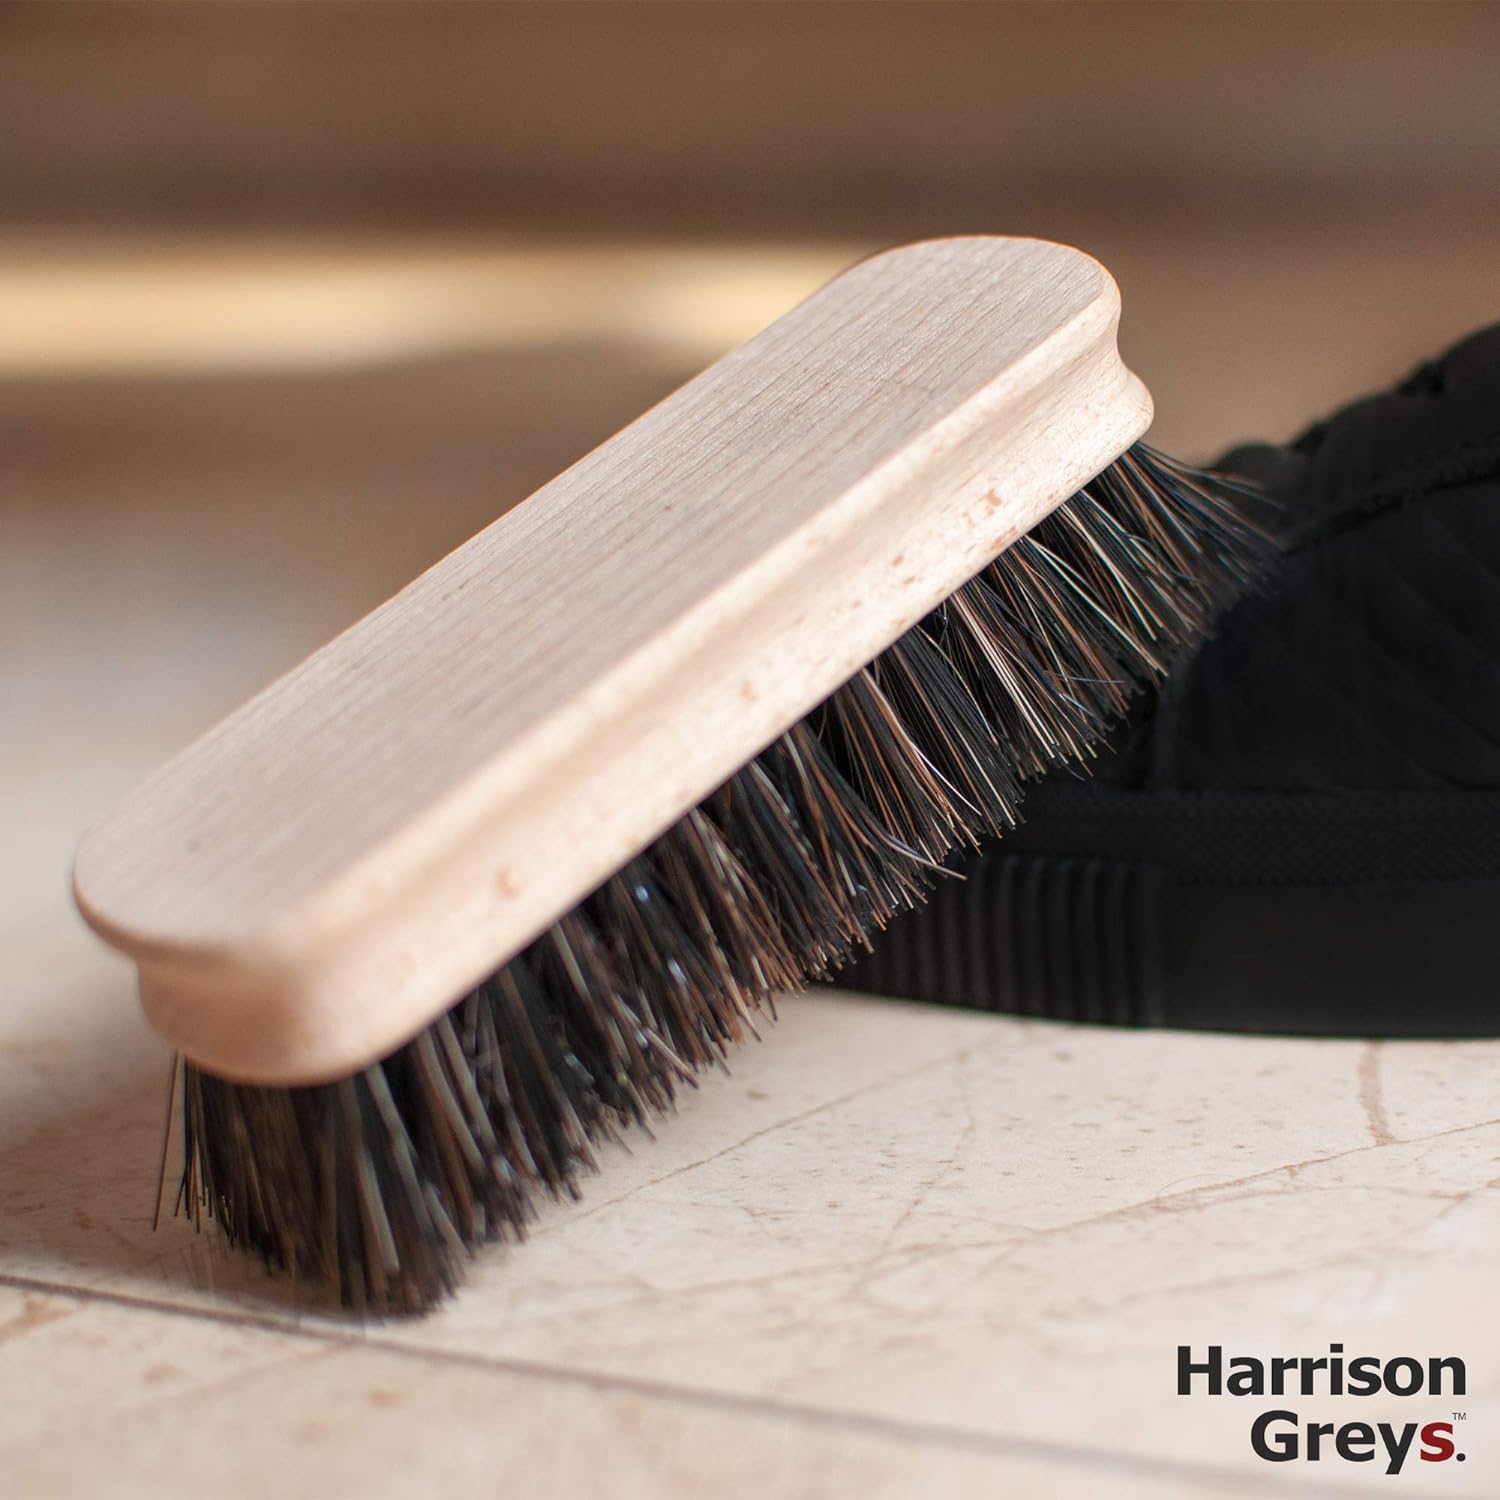 Boot Brush - Shoe and Boot Cleaner Brush, Trainer Cleaner Shoe Polish Brush With Comfortable Handle